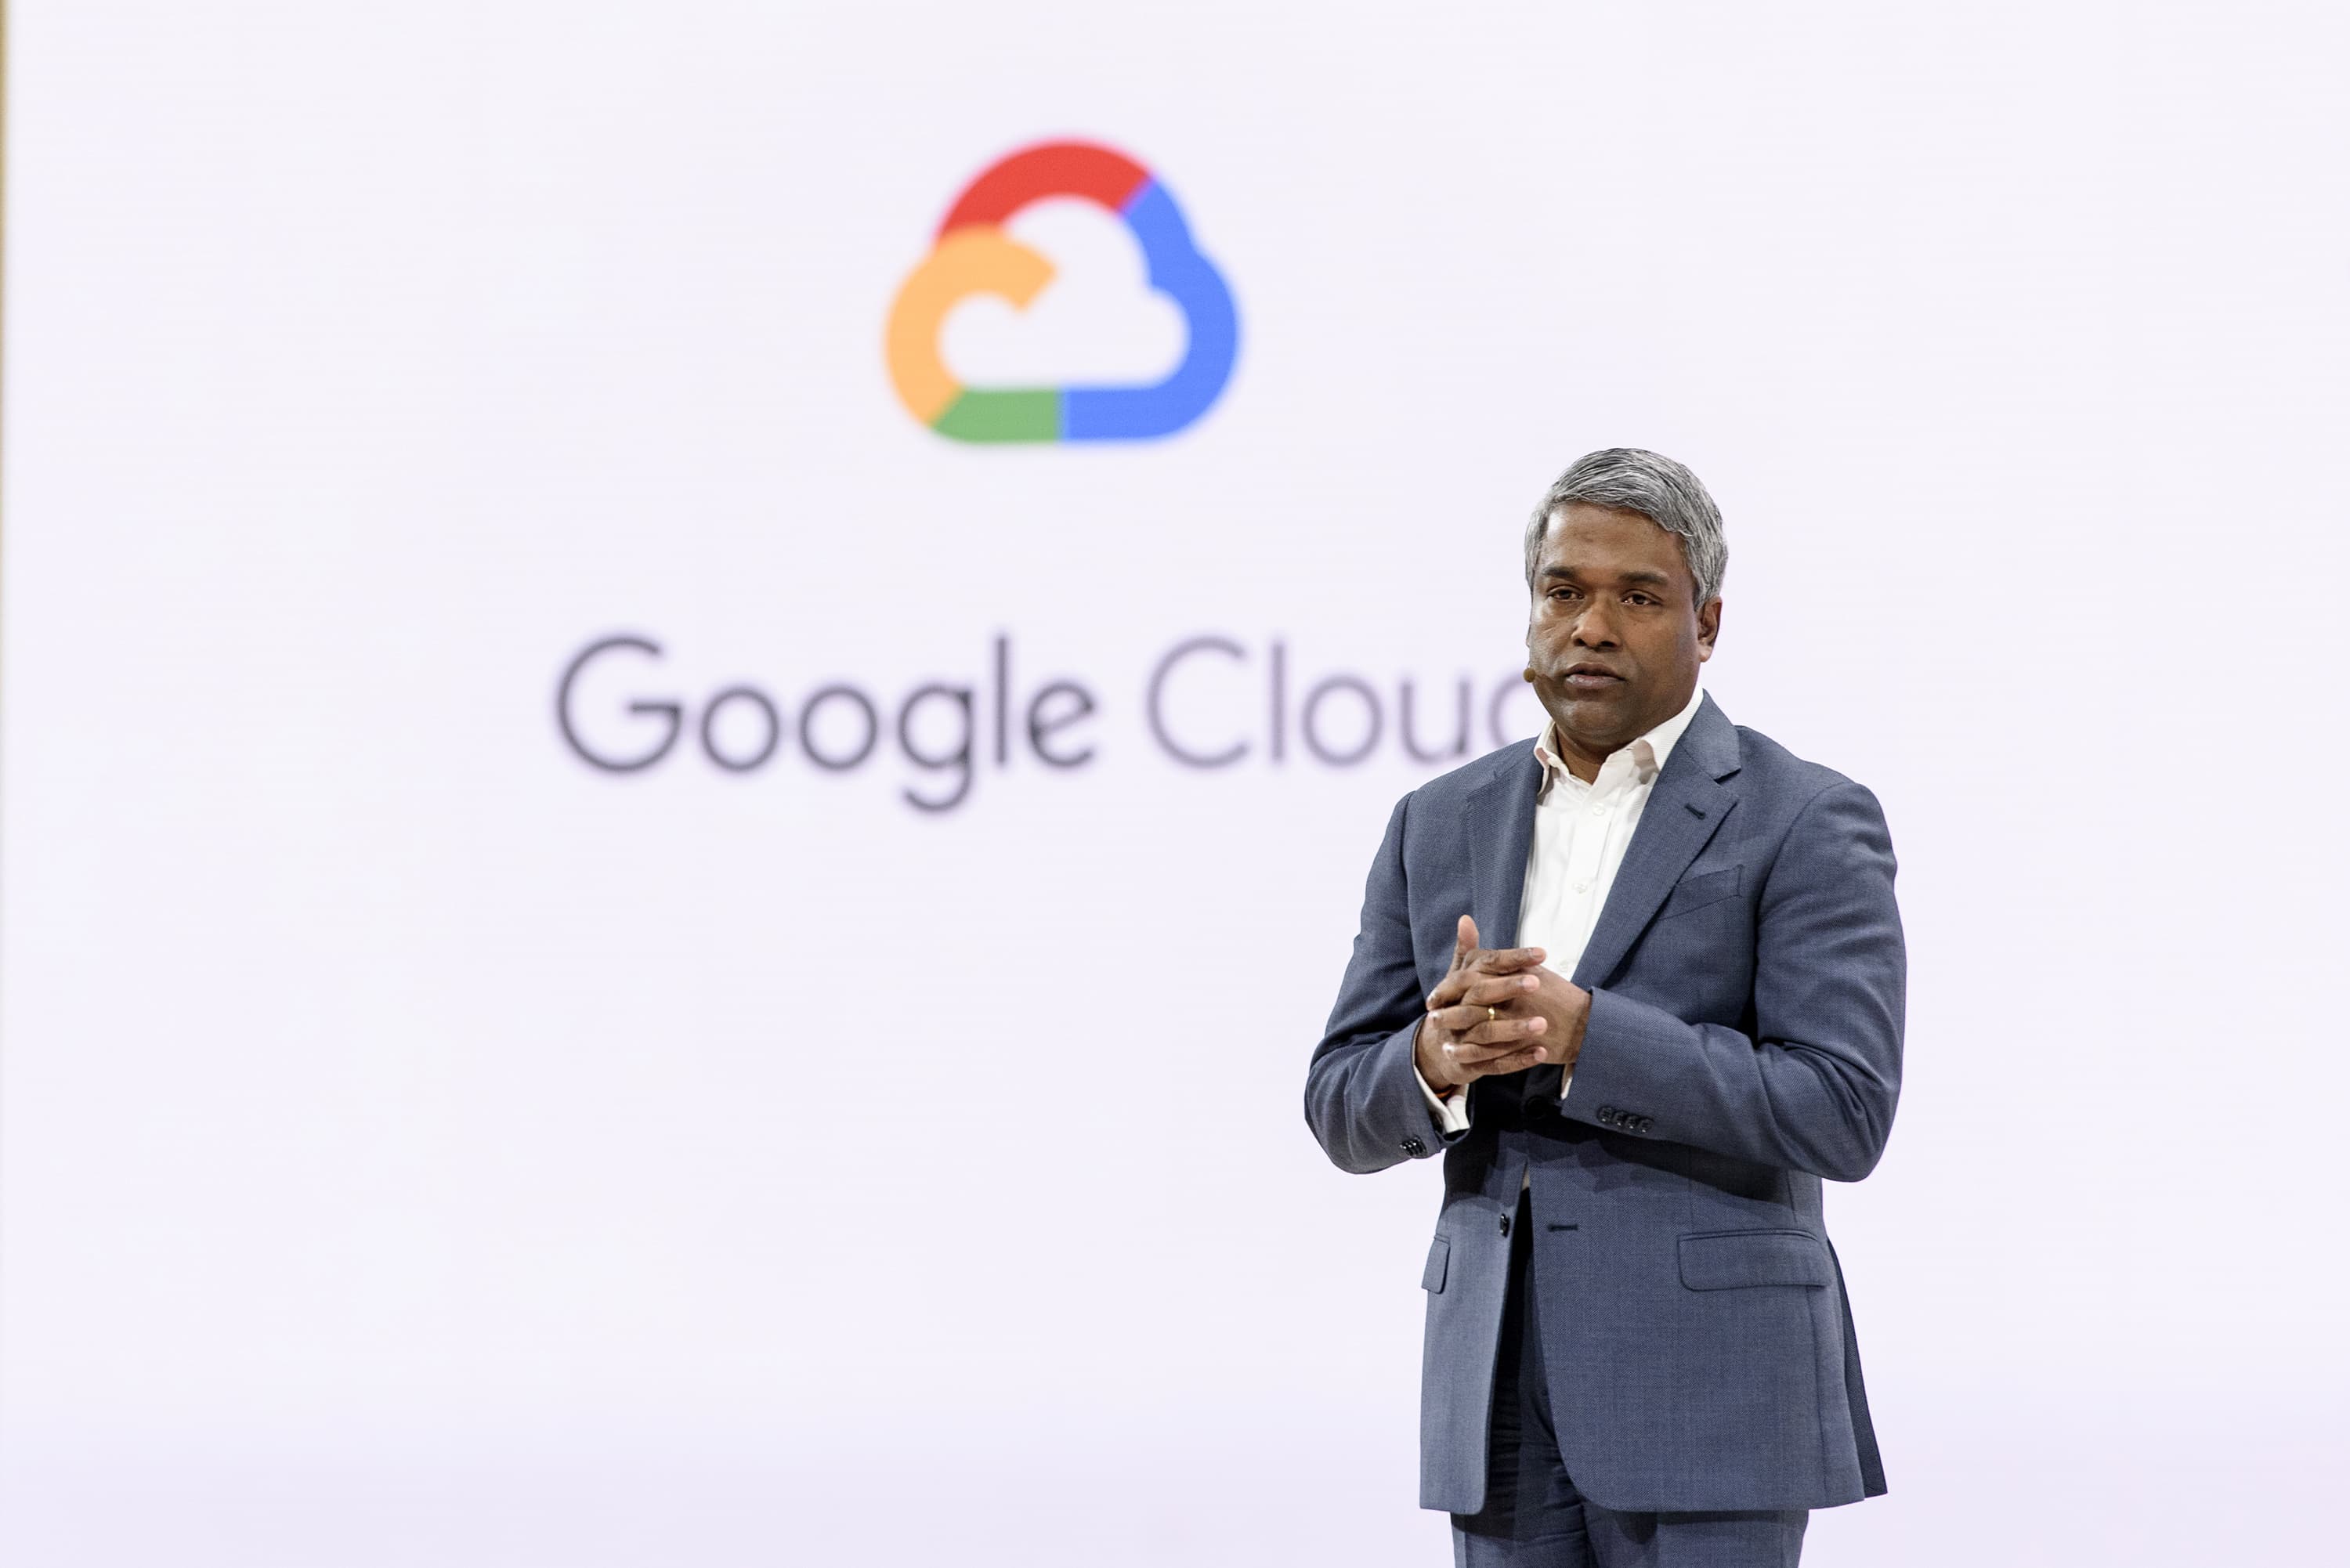 Google Cloud CEO Thomas Kurian reorganizes engineering unit to gain market share more quickly